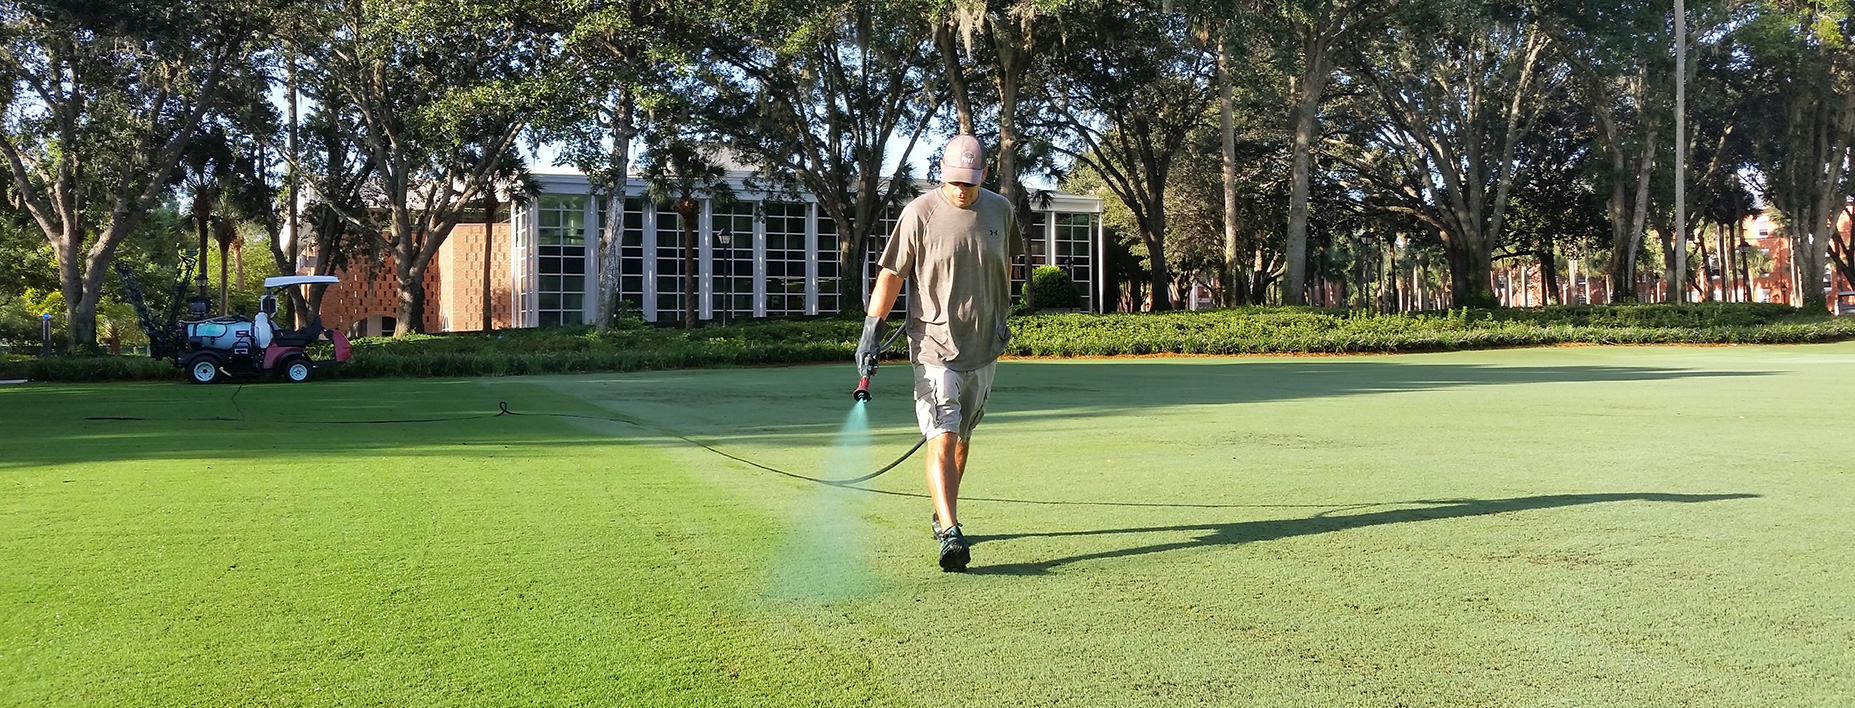 wide shot of Steve spraying a green liquid on the grass with a long hose trailing to his workcart. In the background is the duPont-Ball Library.